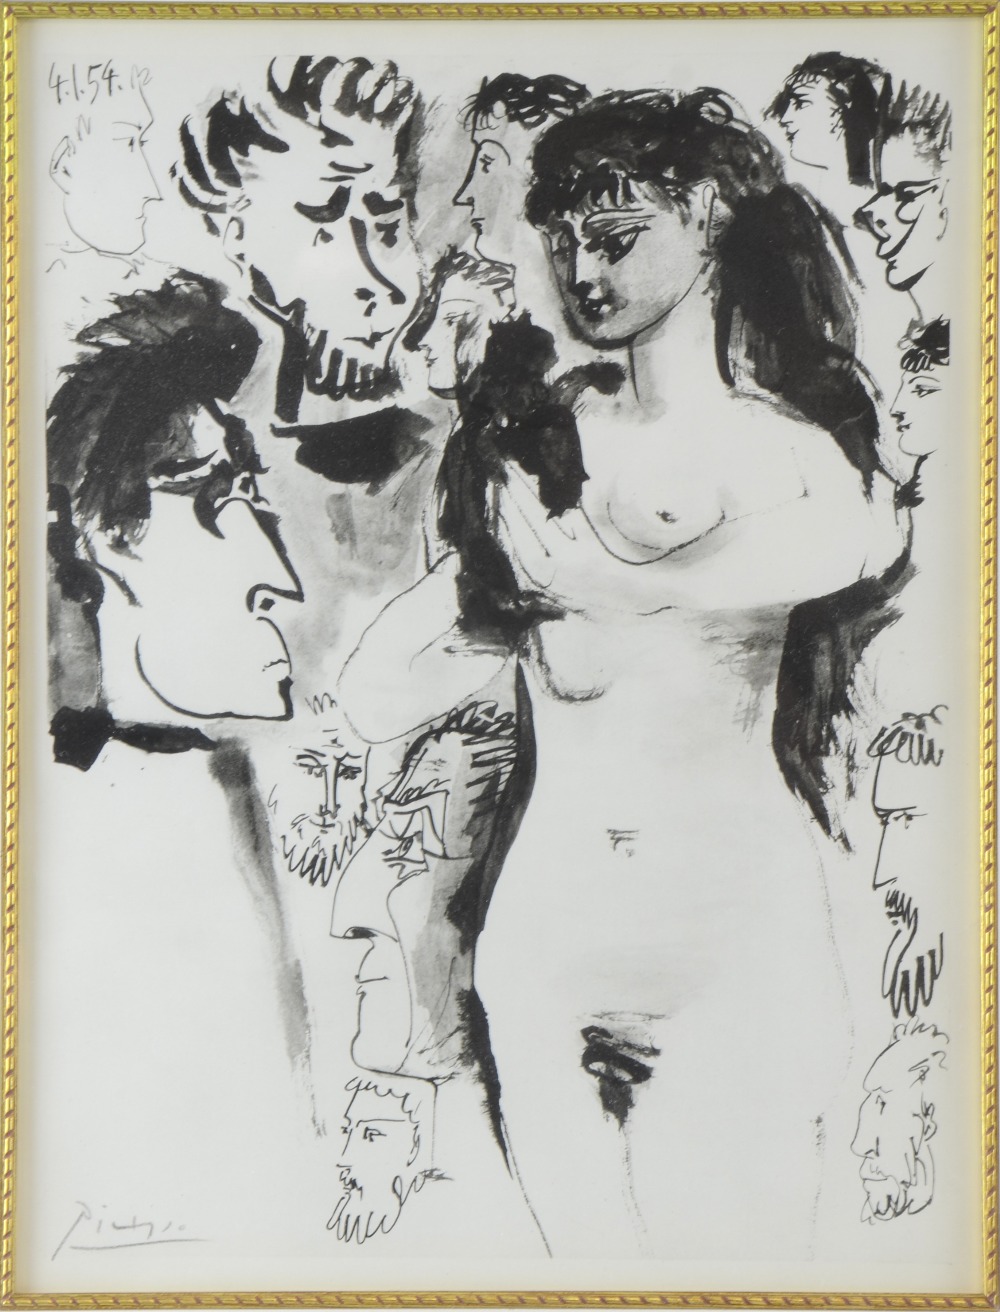 § Pablo Picasso (1881-1973) - Nude surrounded by faces, print published by Mourlot, 1954. bearing